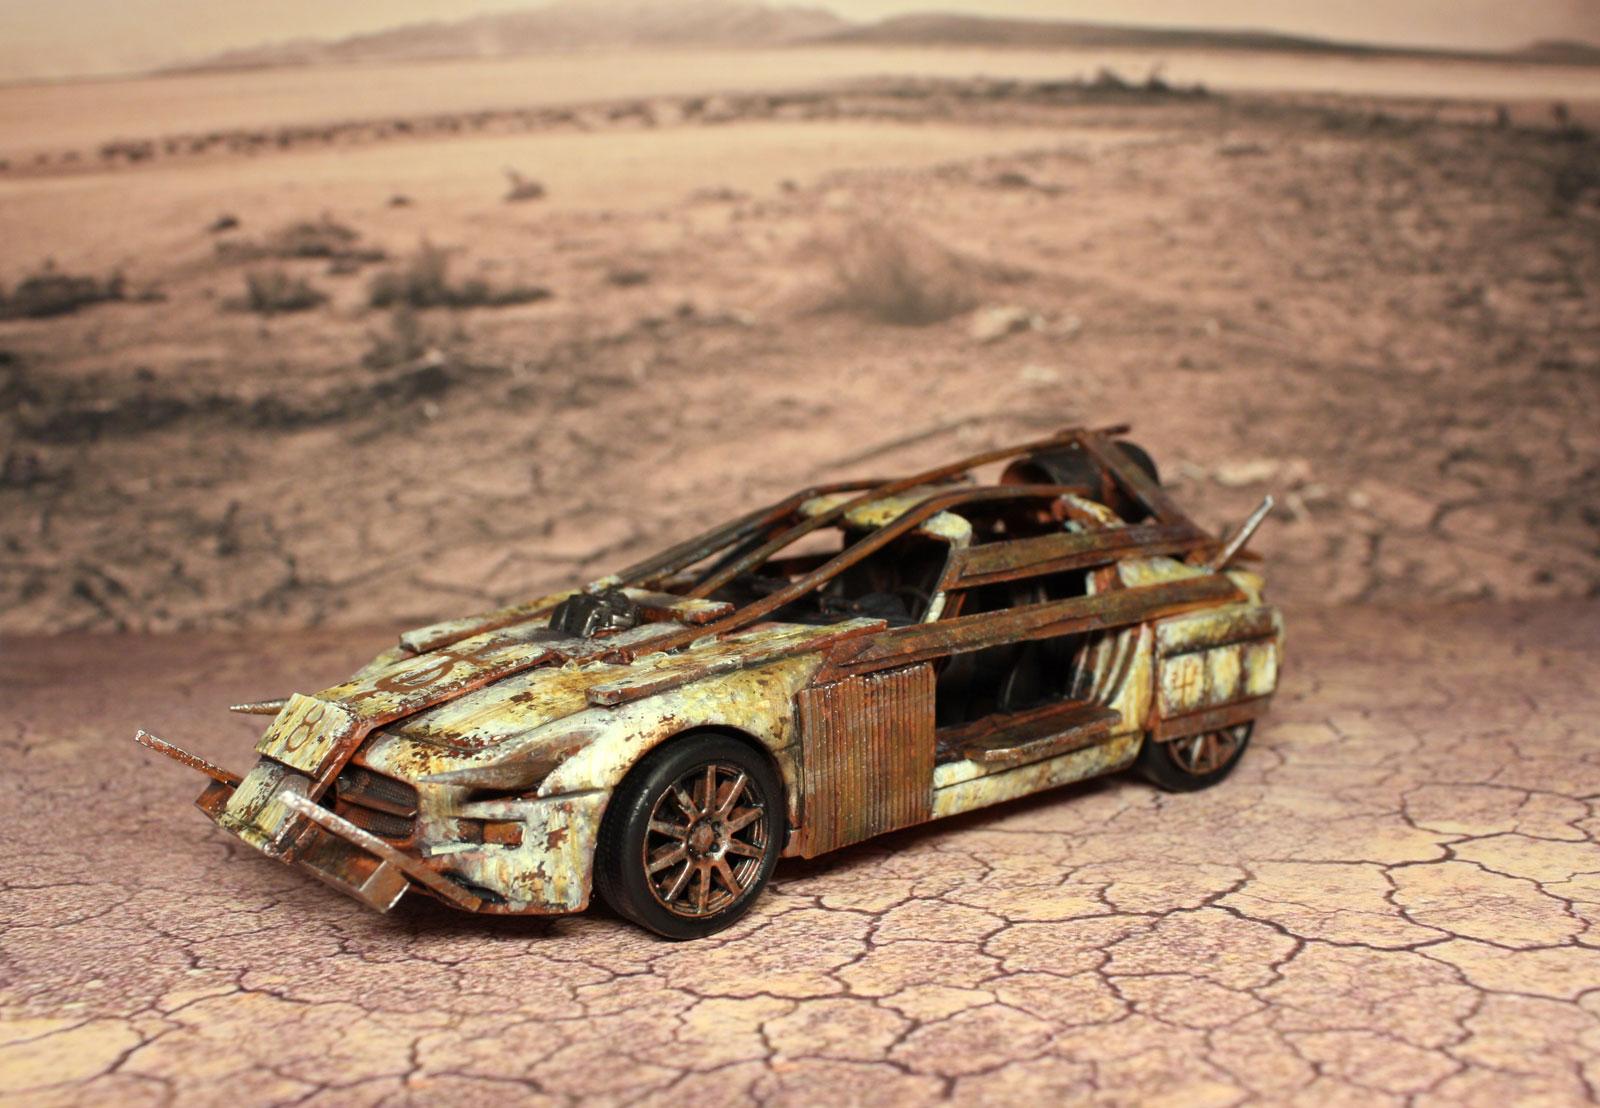 Apo, Apocalypse, Button, Cars, Mad, Max, Nation, Post, Post Apocalyptic, Rbn, Red, Rust, Weathered